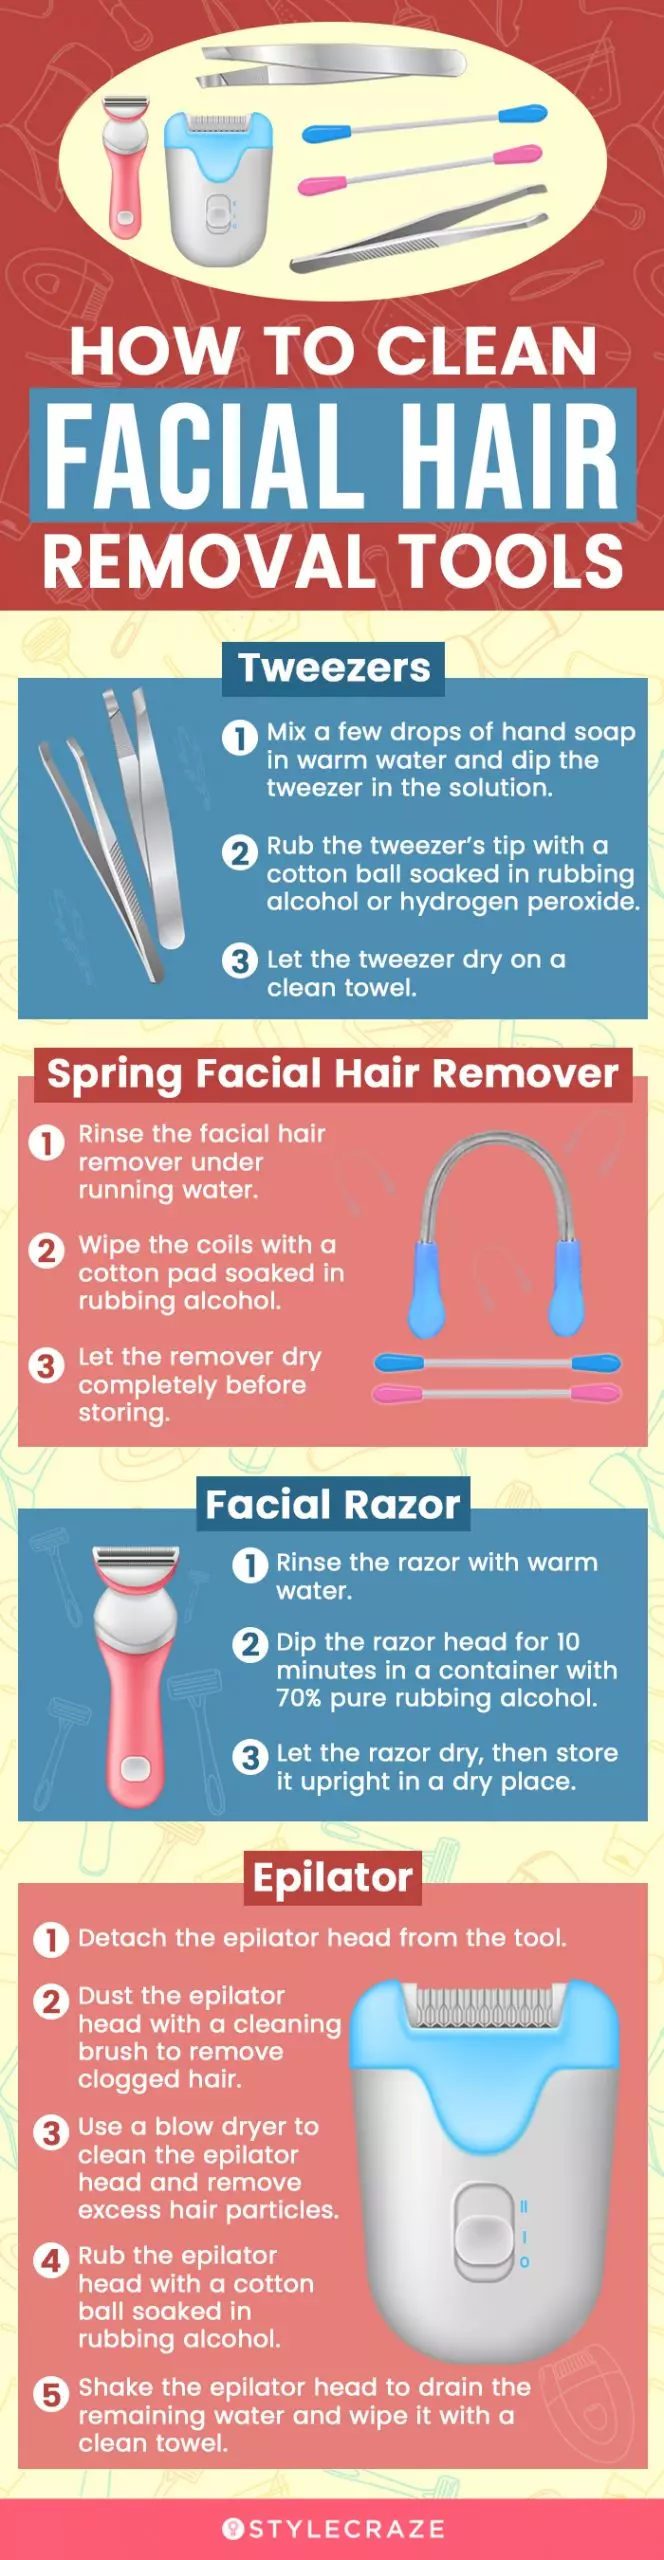 How To Clean Facial Hair Removal Tools